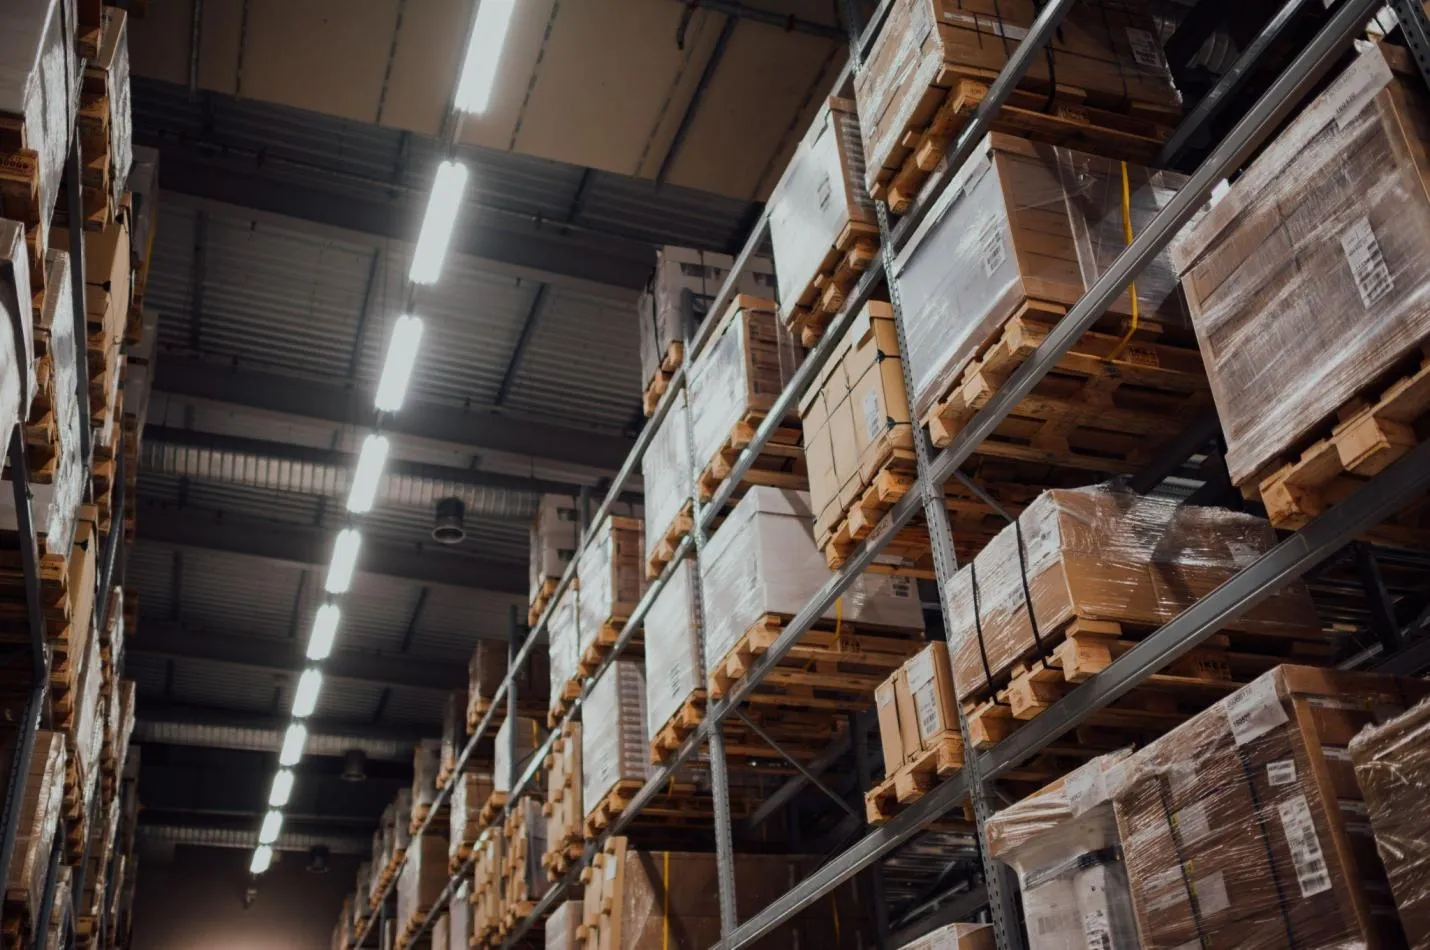 How to Modernize & Digitalize Your Warehouse Without Complexity